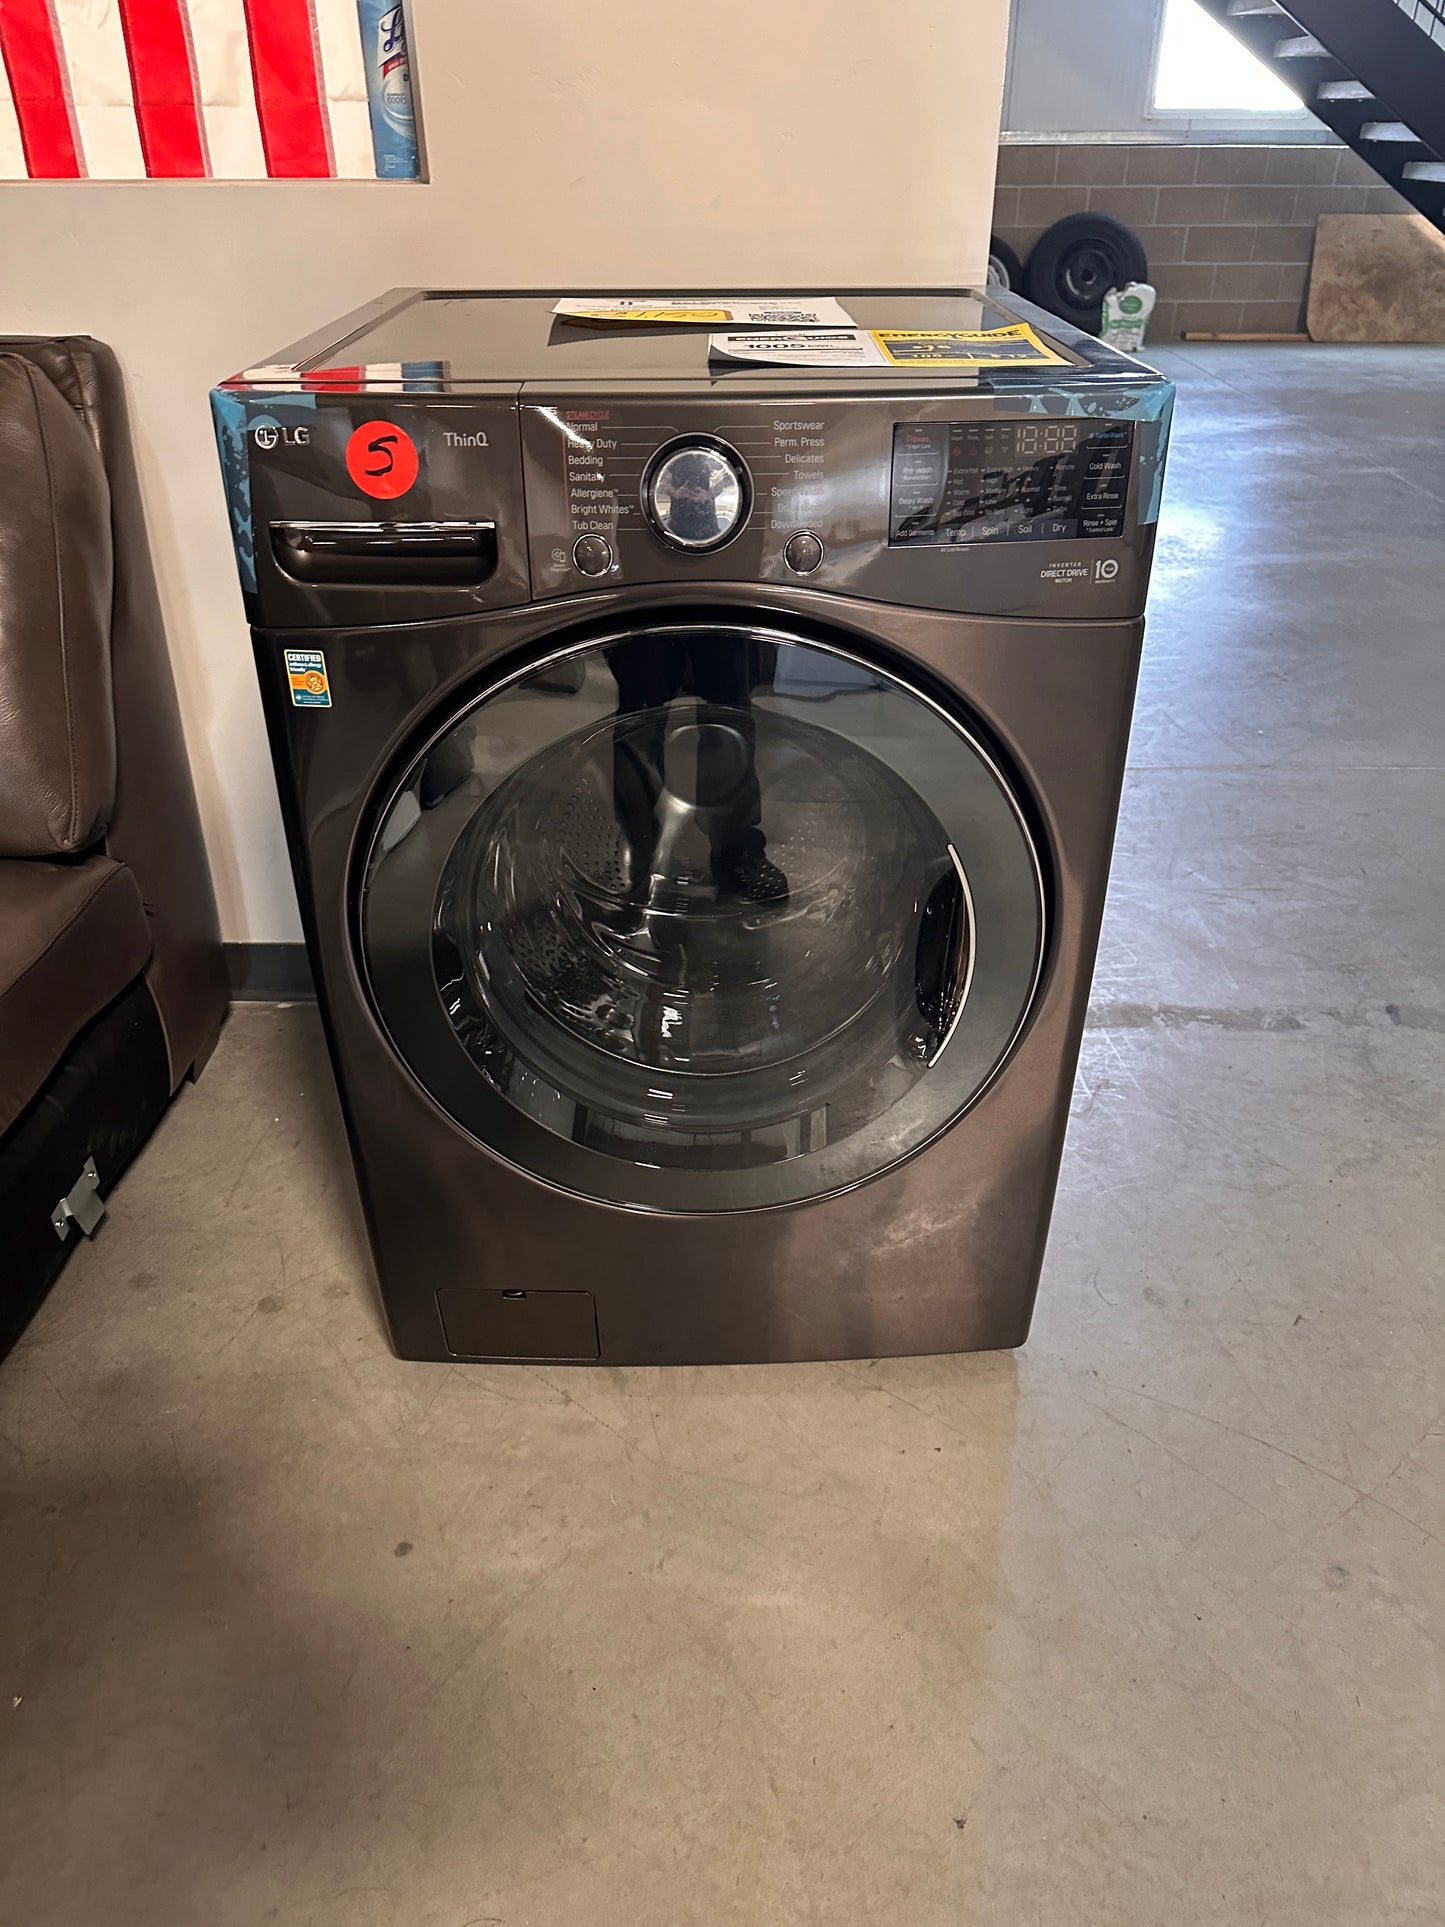 SALE! GORGEOUS NEW COMBO MACHINE - COMBINATION WASHER ELECGTRIC DRYER - MODEL: WM3998HBA  WAS13270